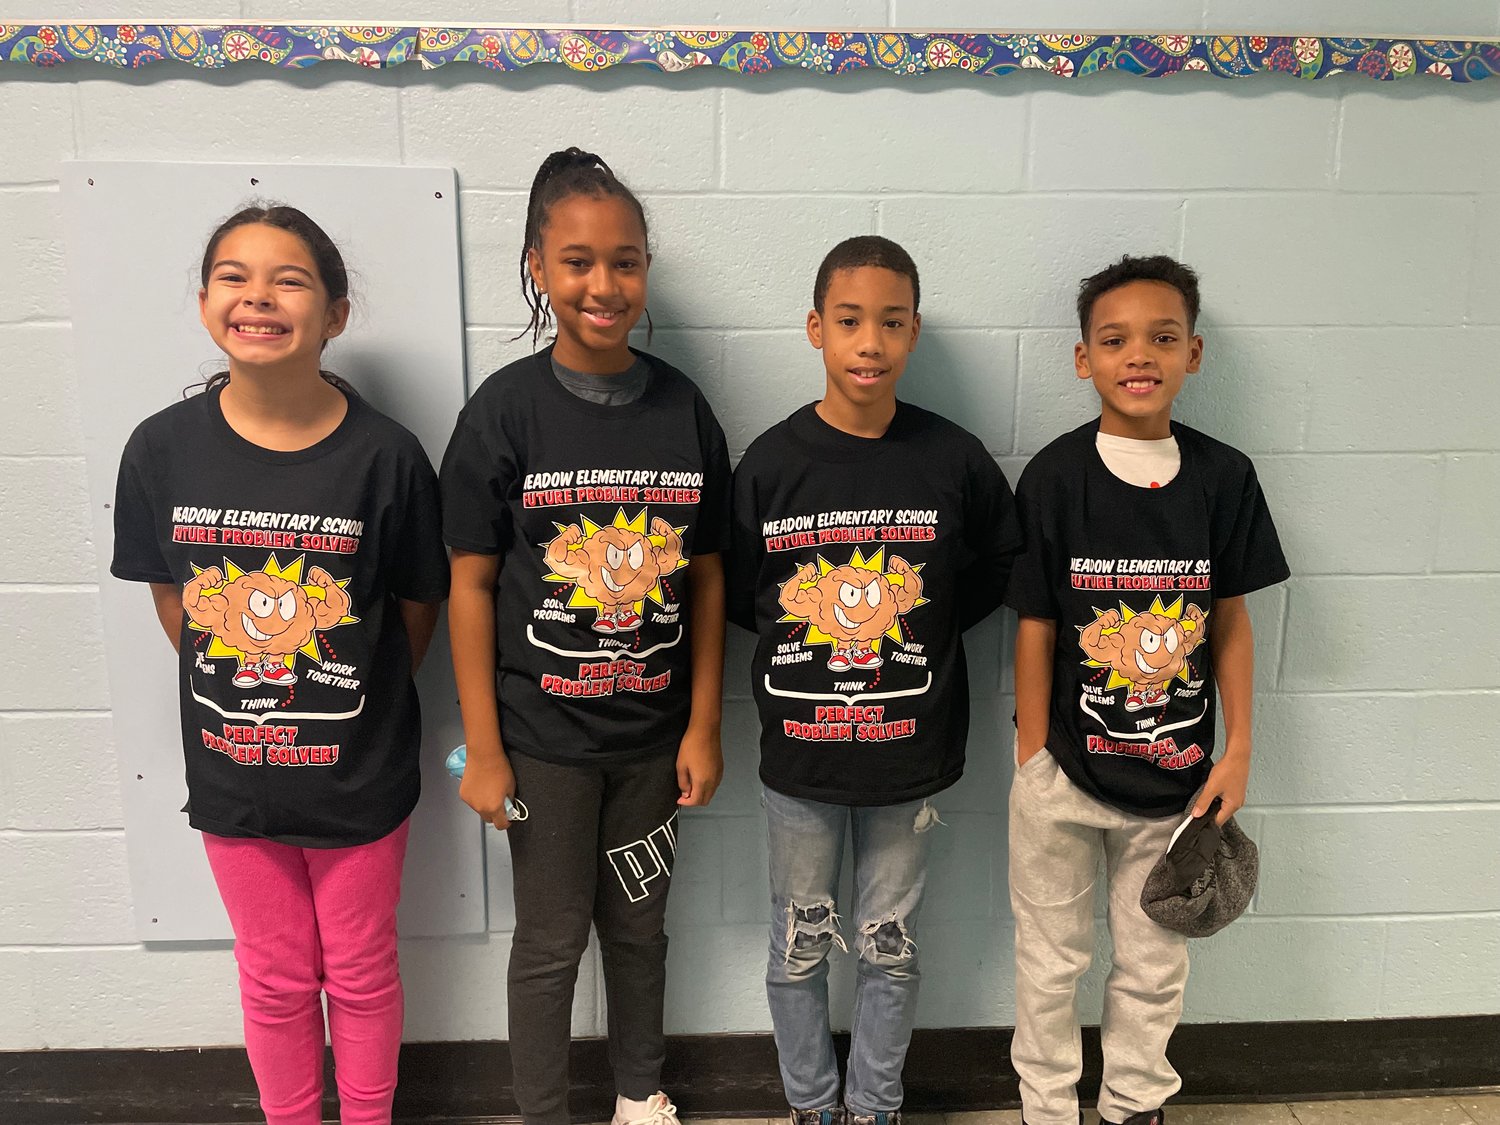 Wild Brains team is represented by students Olivia, Kristen, Mekhi, Elijah, who placed first for their Action Place skit presentation.